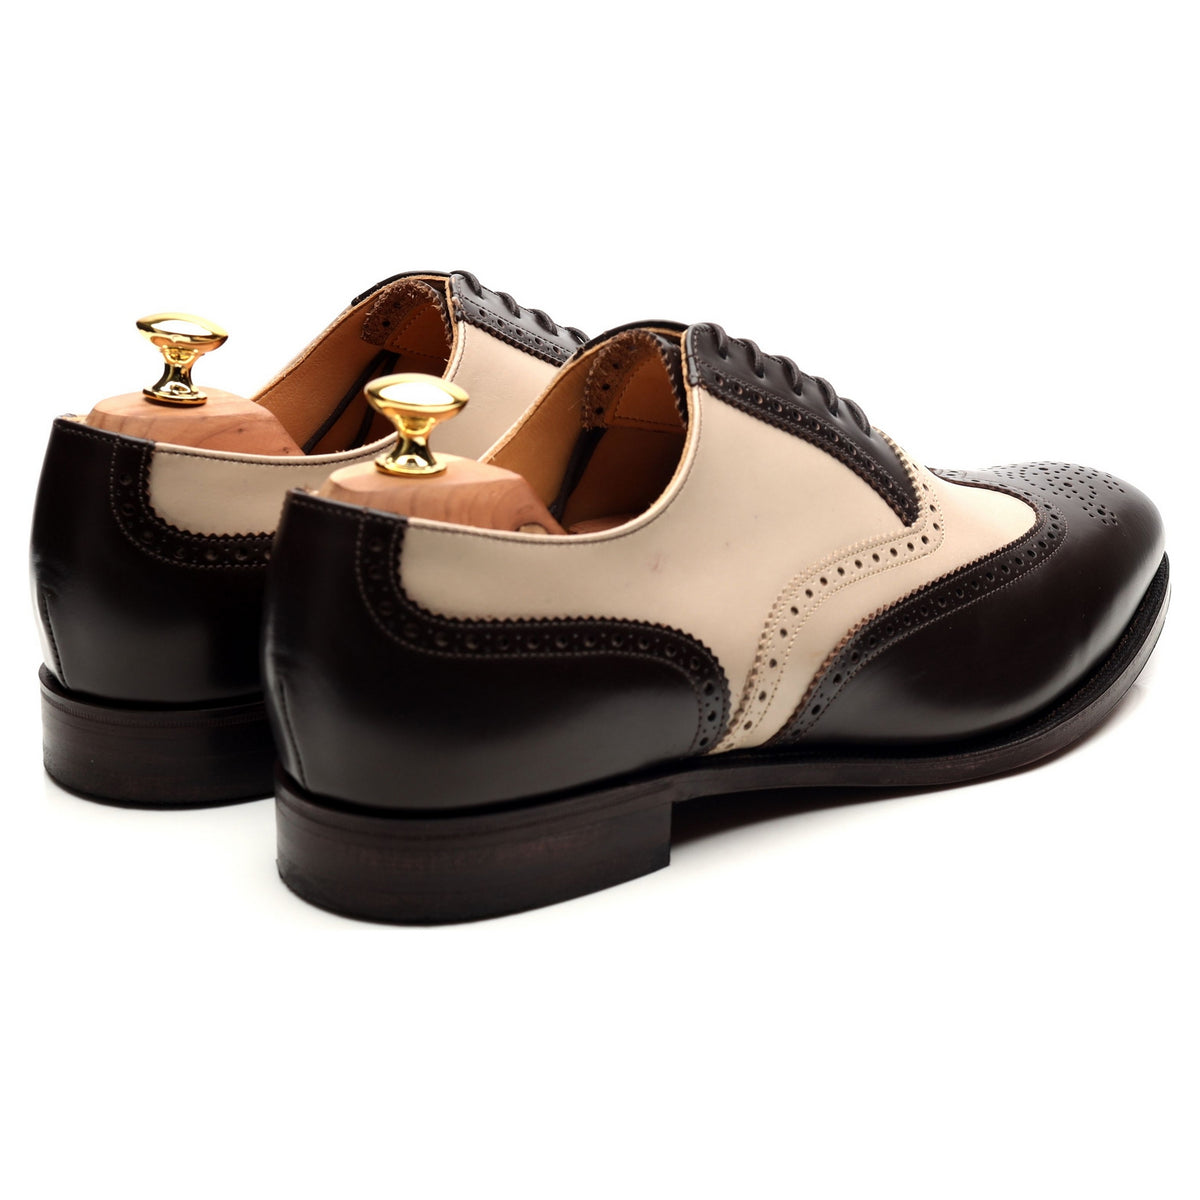 &#39;Melly&#39; Dark Brown Leather Spectator Brogues UK 11 F